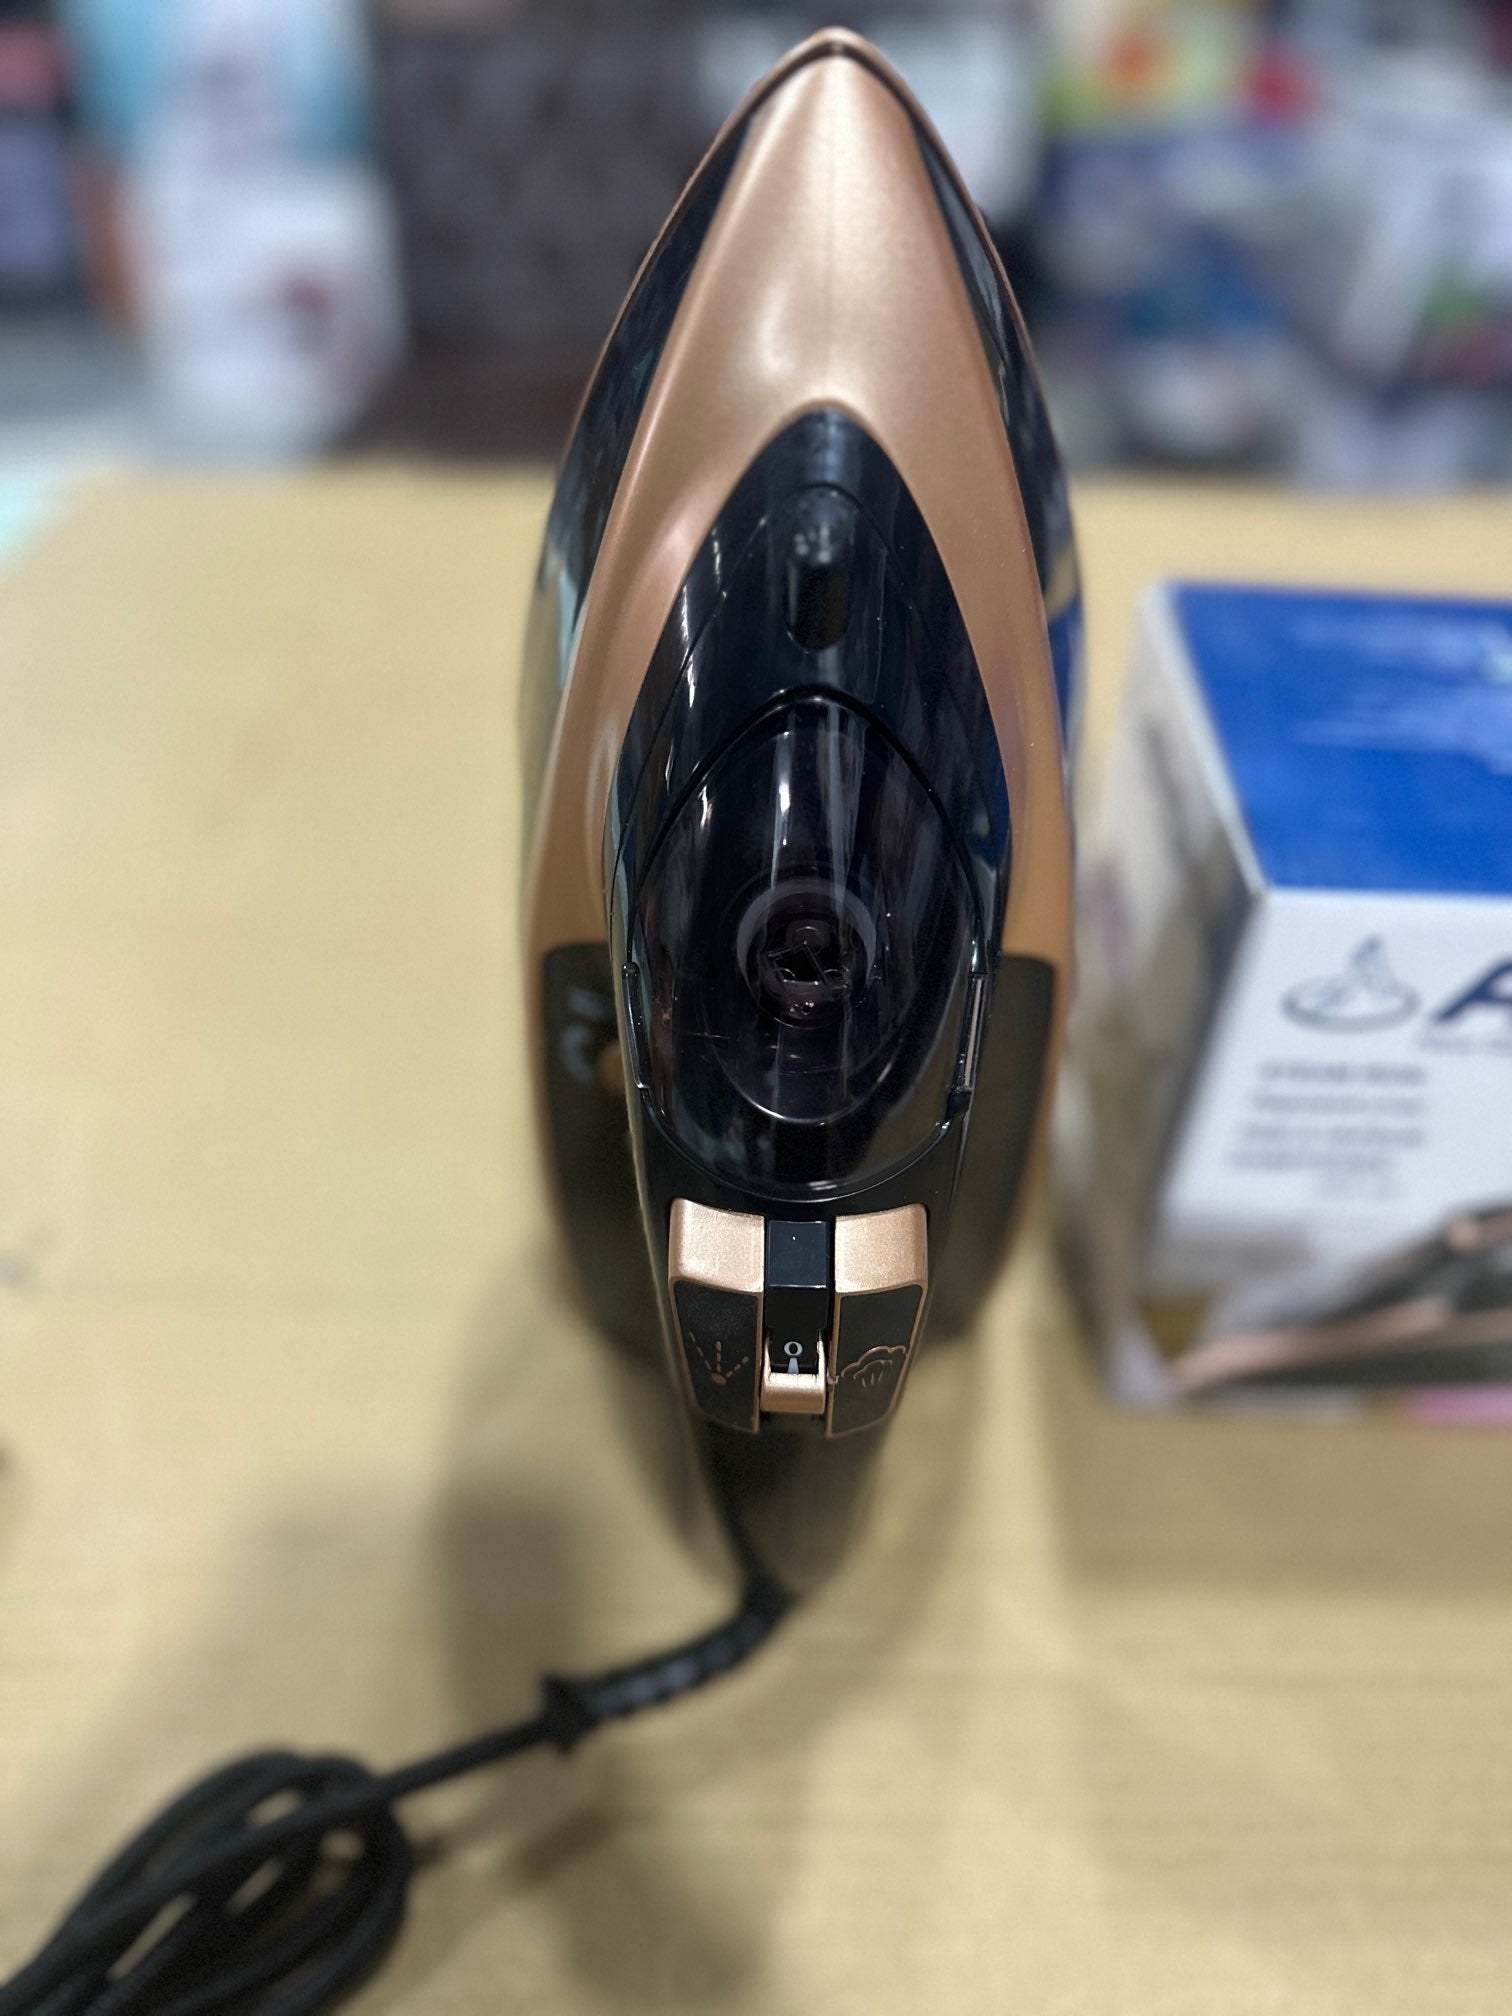 Germany lot imported 2400watt Electric steam iron